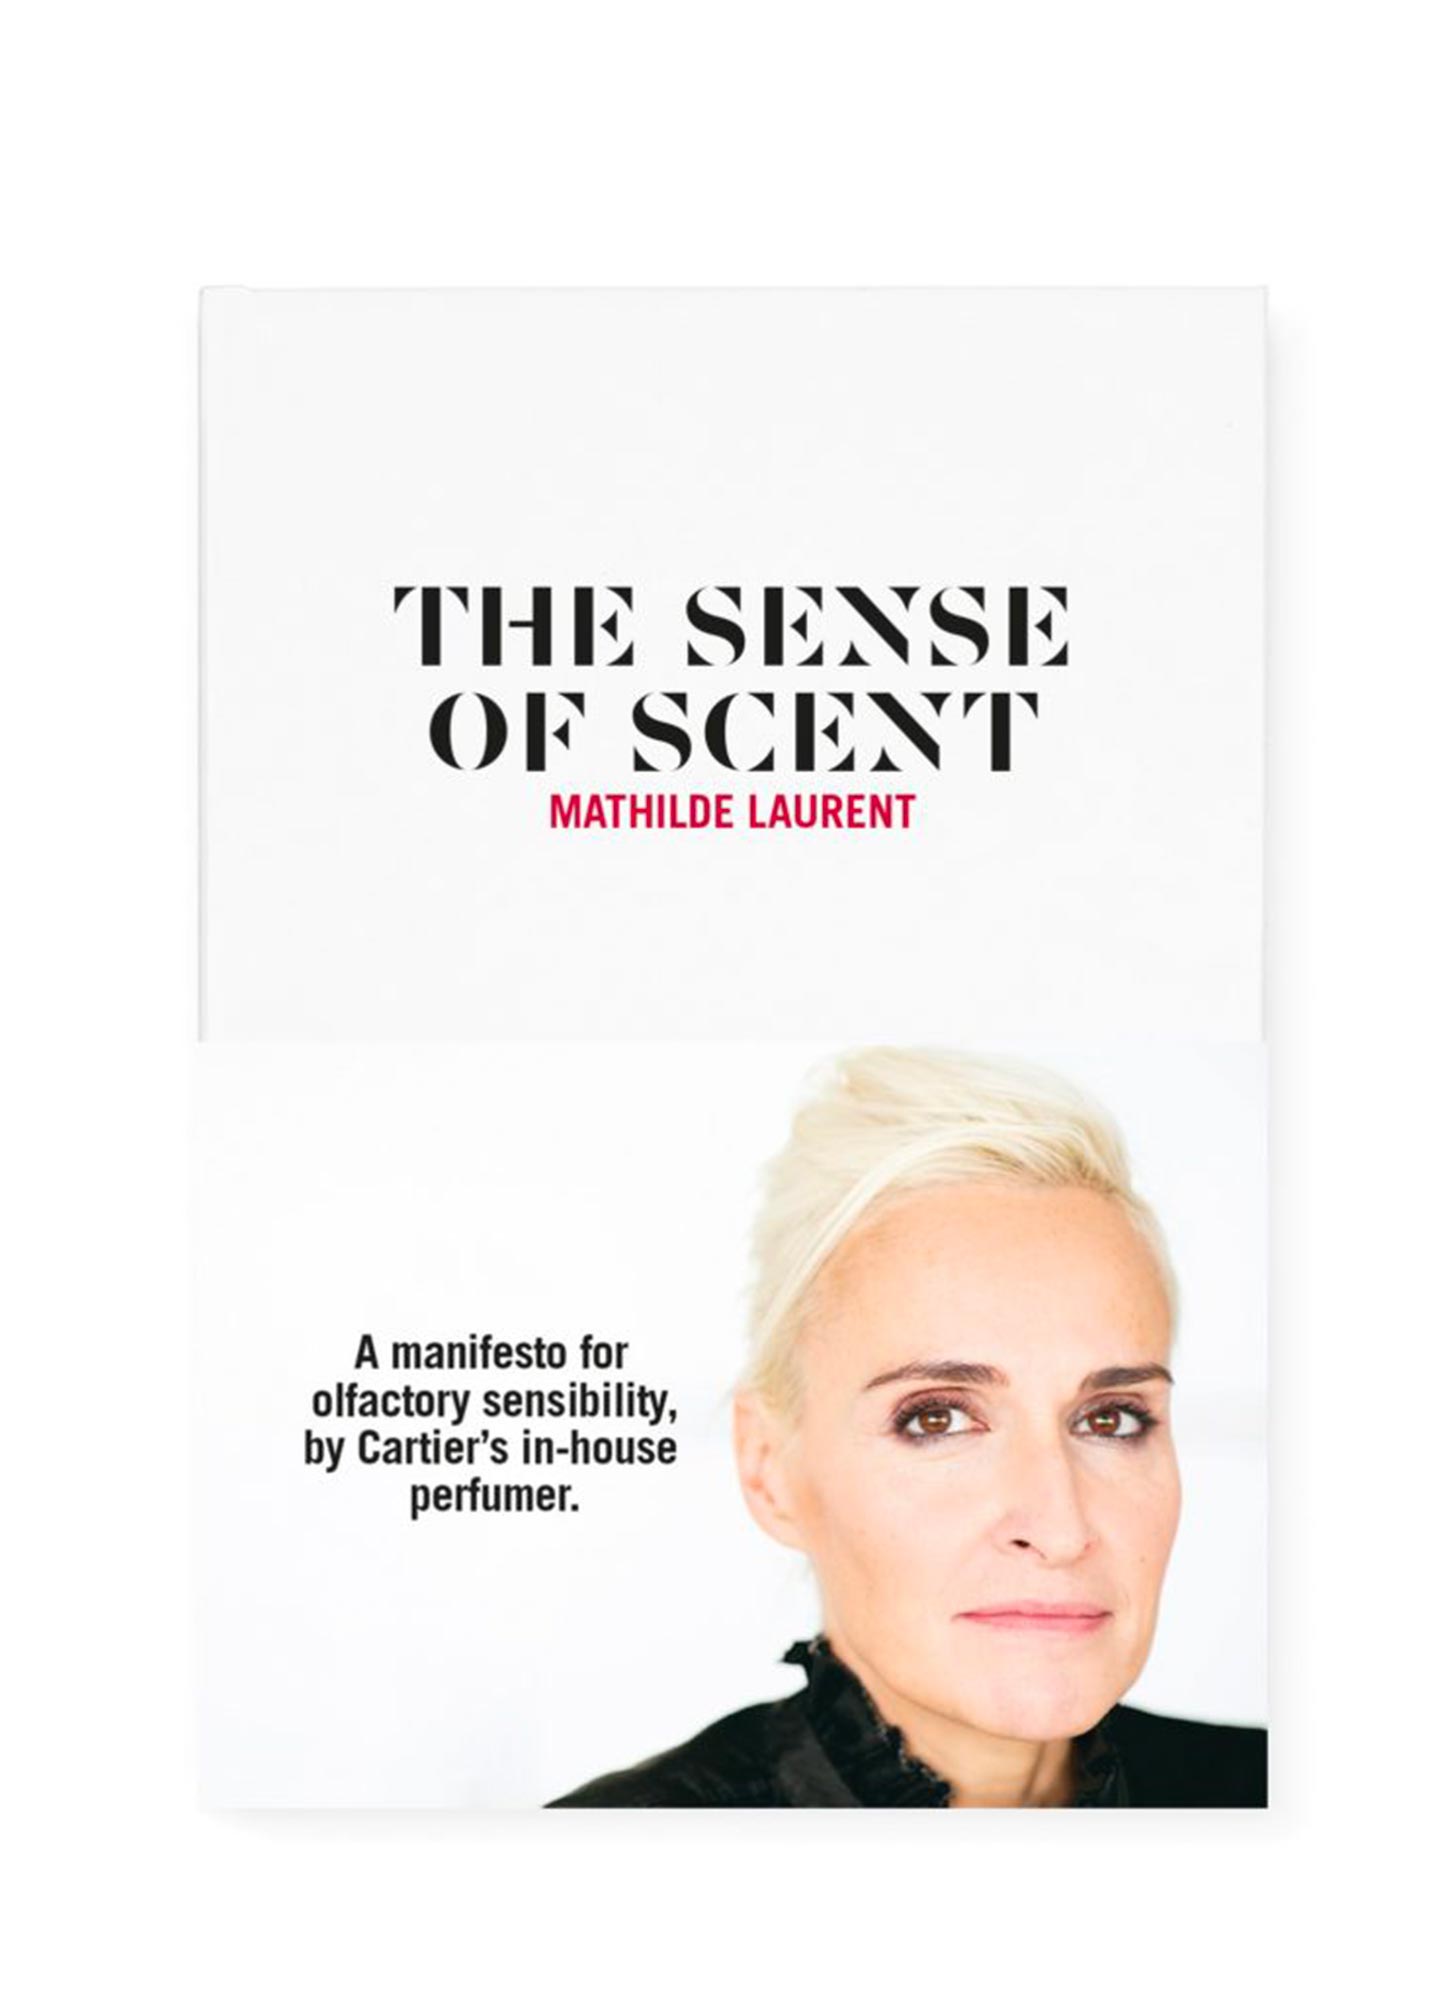 The Sense of Scent, a book by Cartier's in-house perfumer Mathilde Laurent, published by Nez Éditions